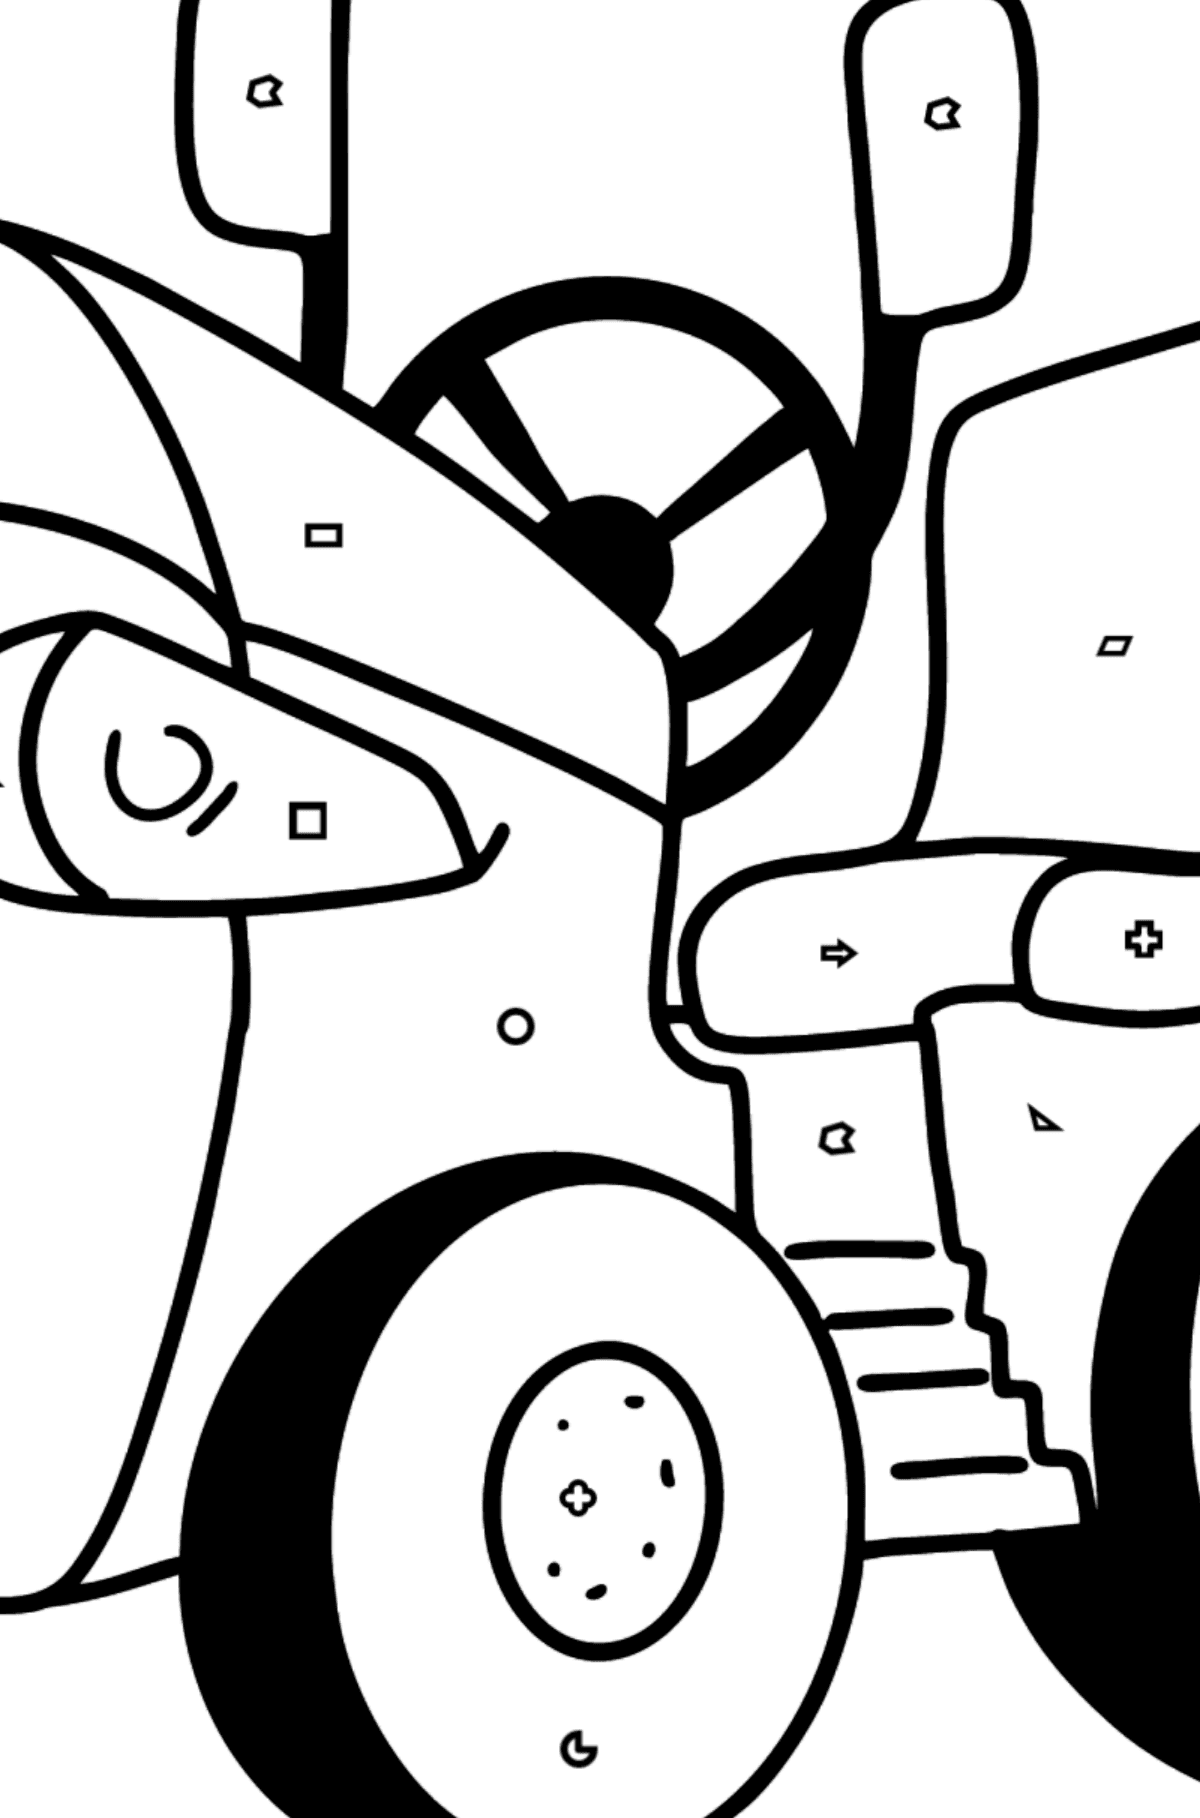 T-15 Mini Tractor Fighter coloring page - Coloring by Geometric Shapes for Kids